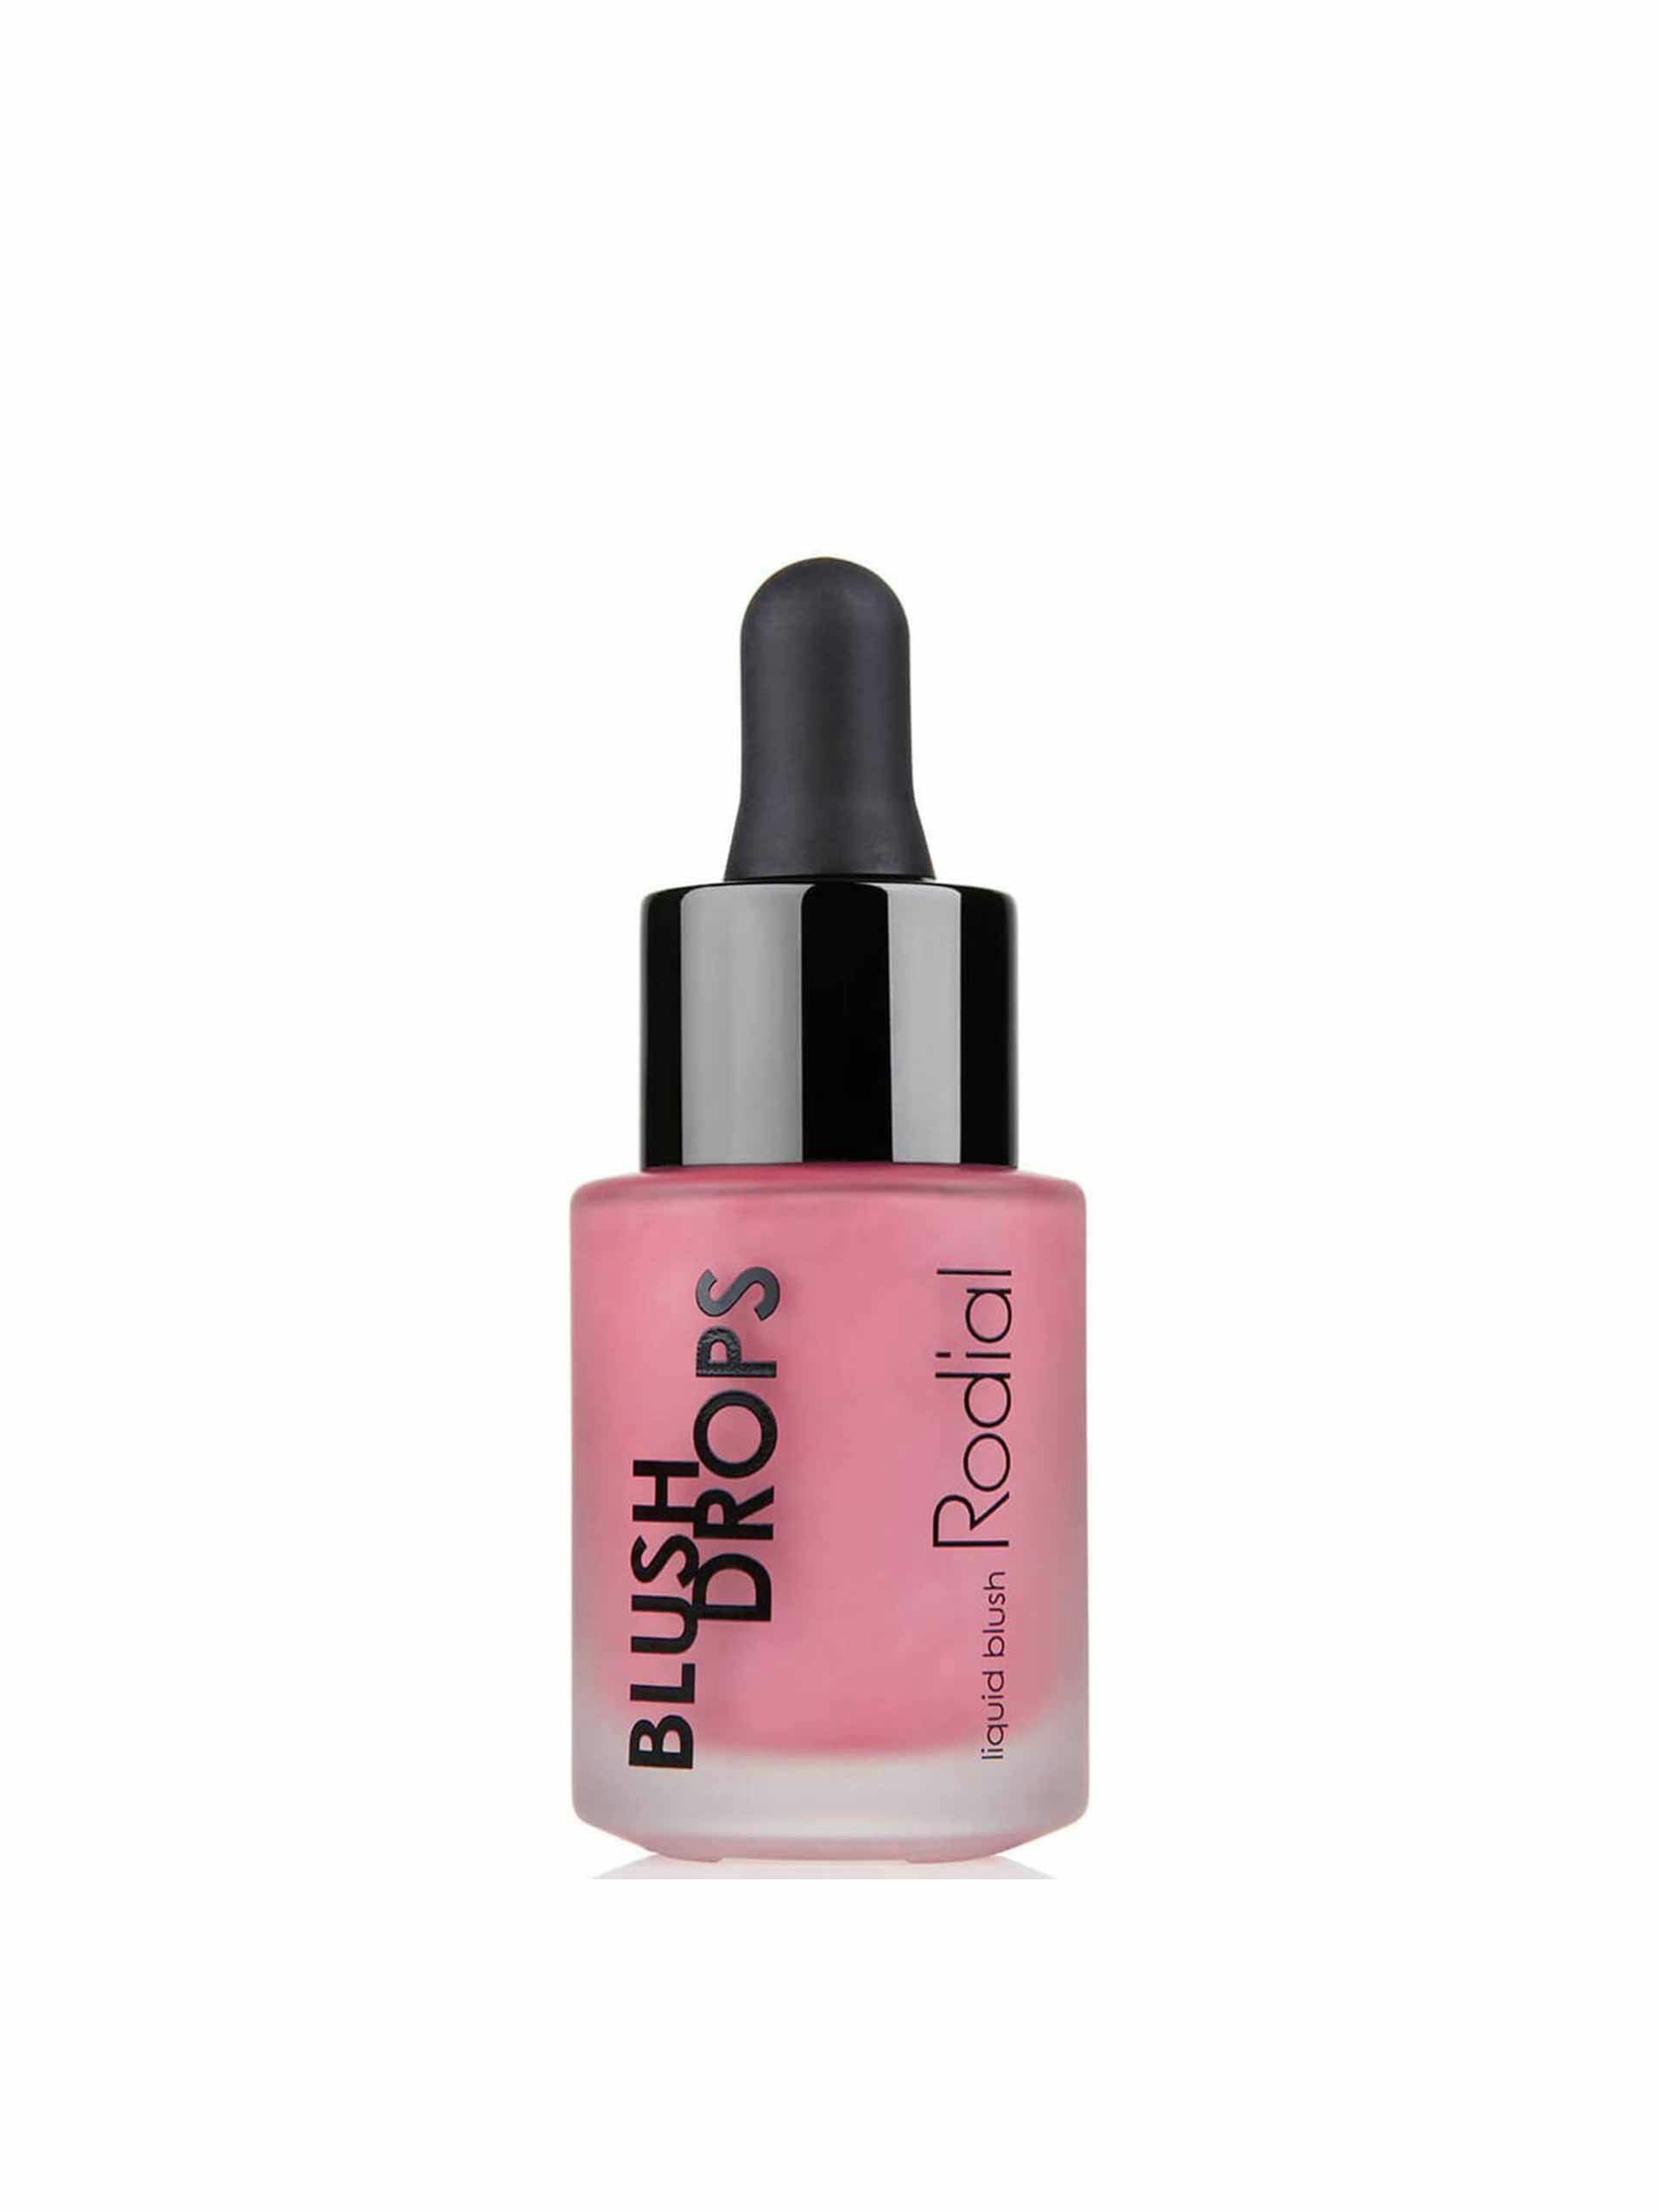 Frosted pink liquid blush